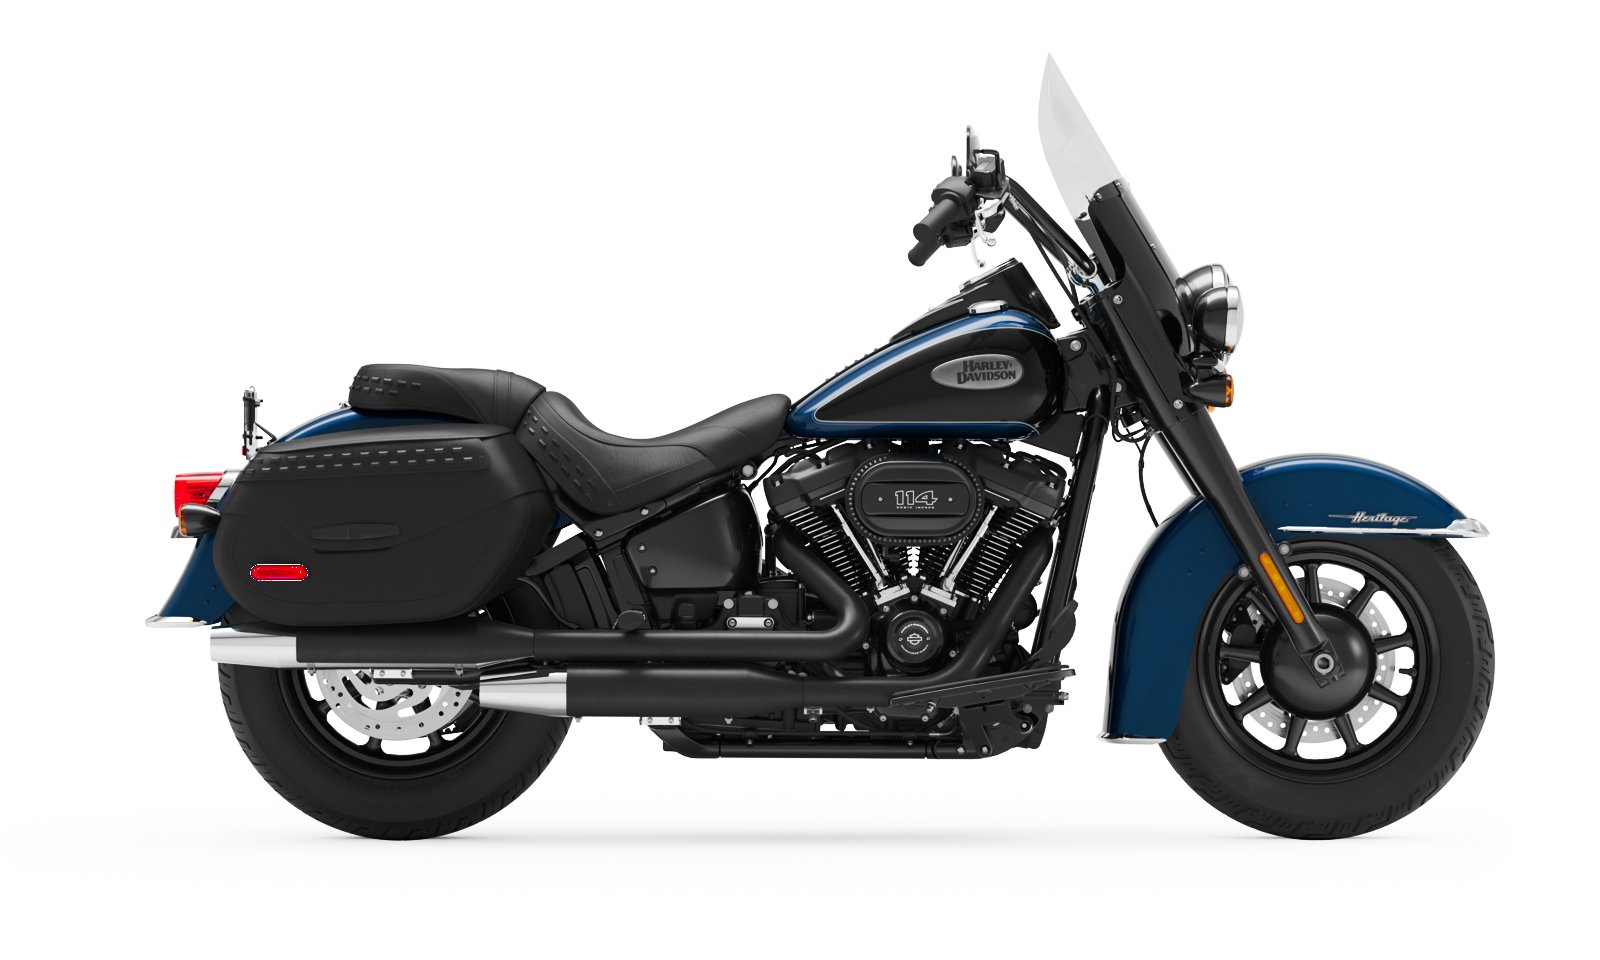 The 2022 Harley-Davidson Heritage Classic Motorcycle